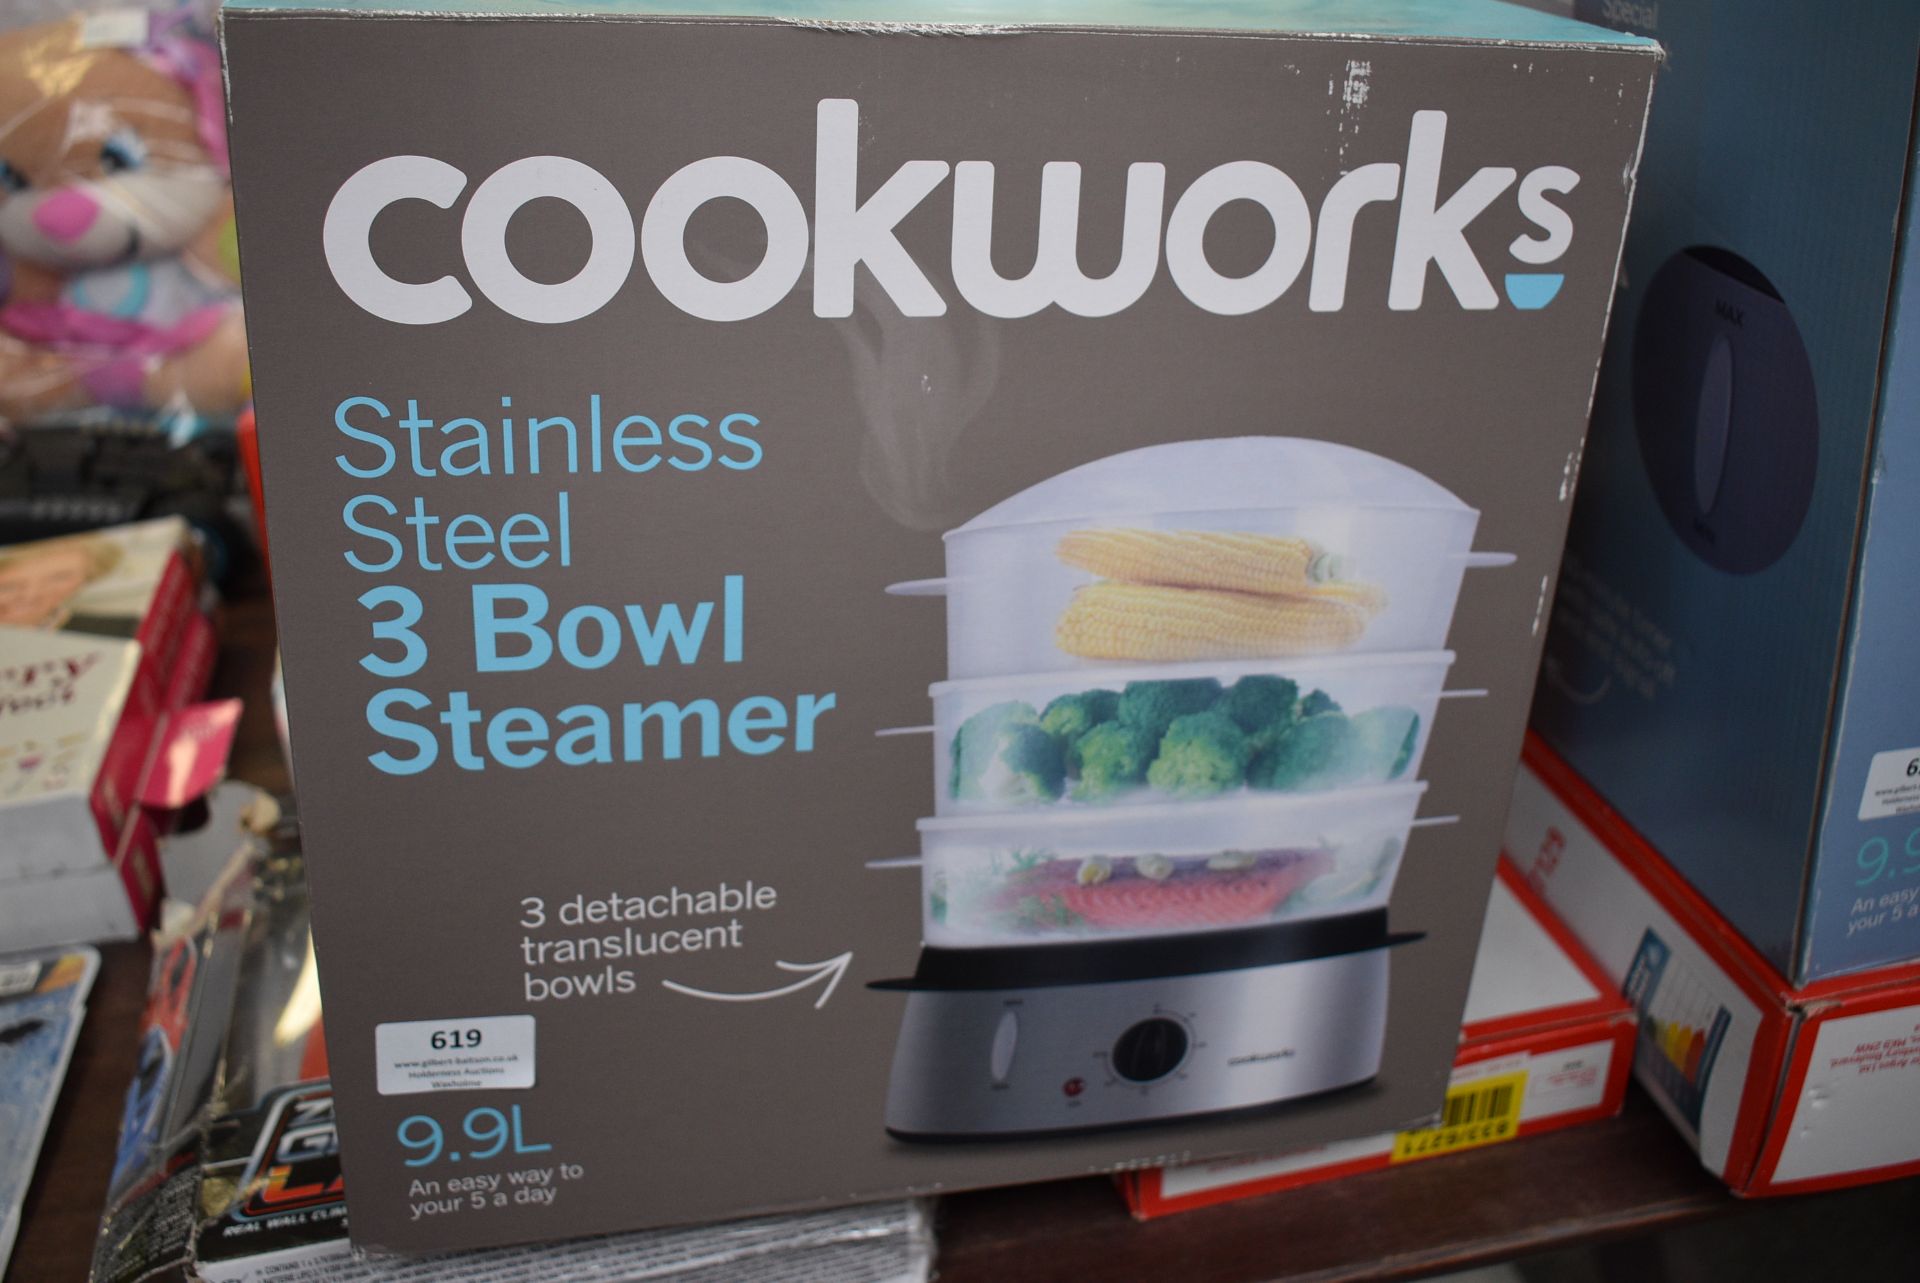 Stainless Steel Three Bowl Steamer - Image 2 of 2